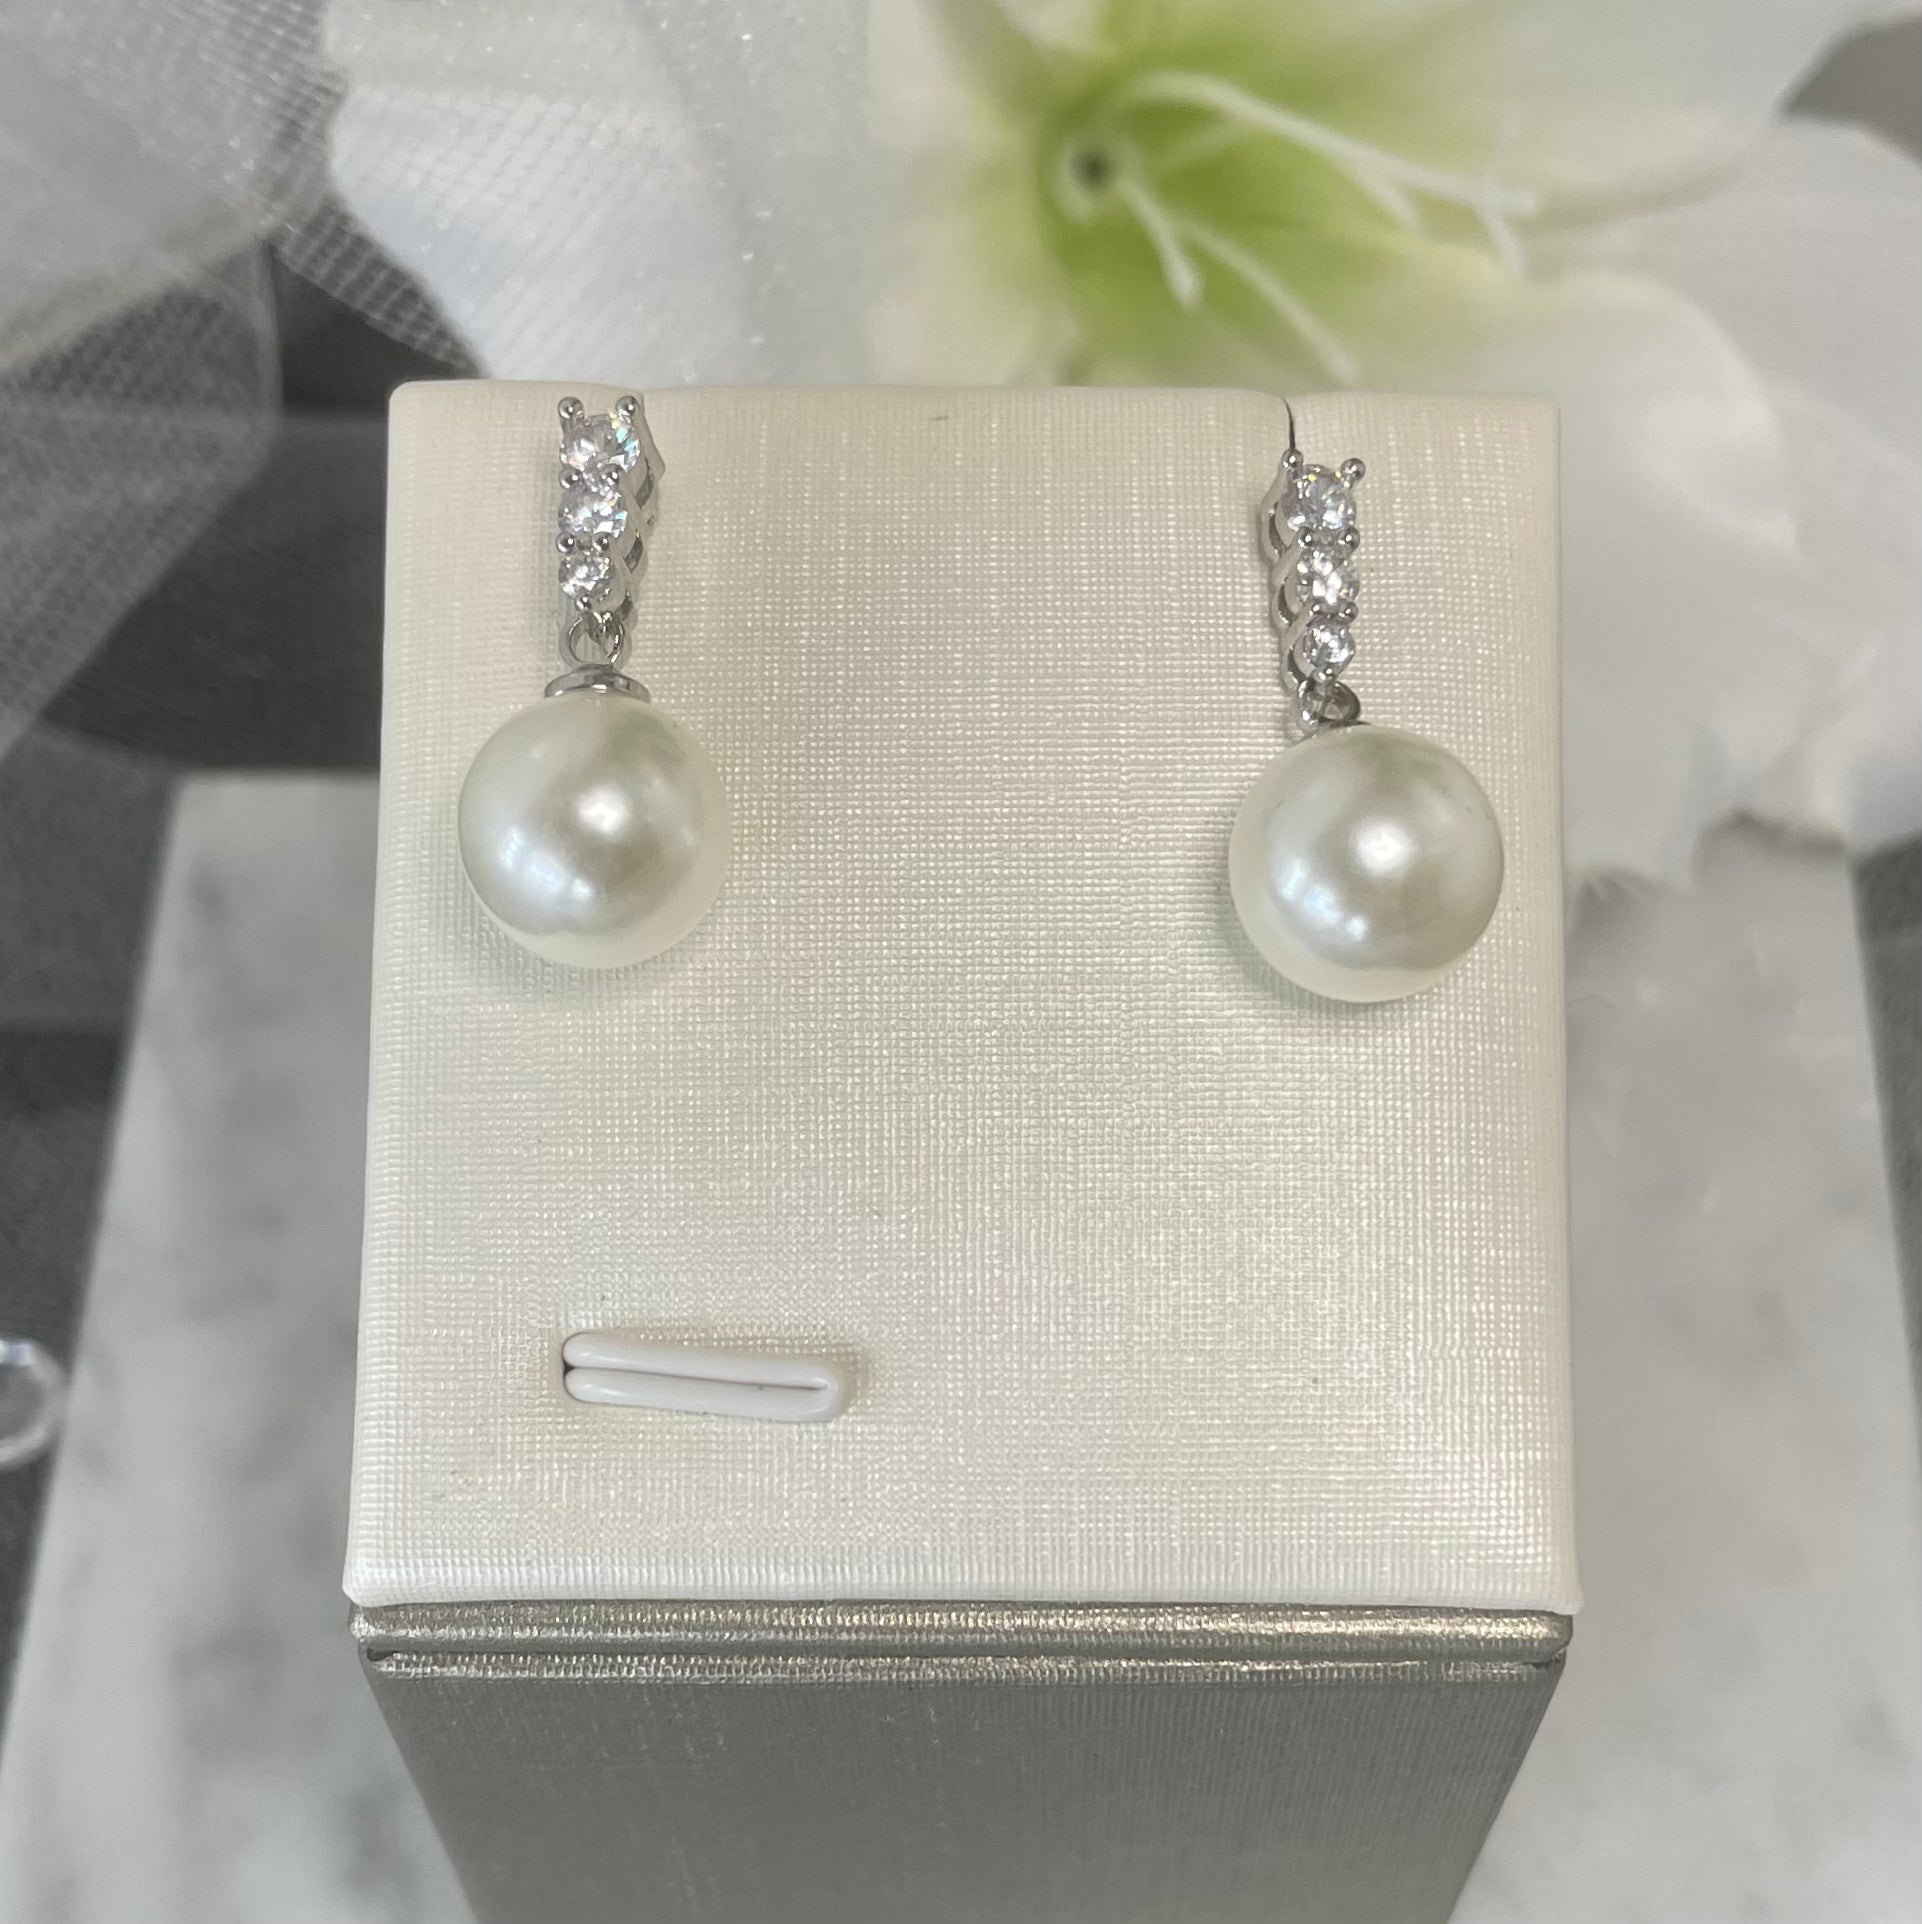 Close-up view of Everly Crystal Pearl Bridal Earrings featuring three varying-sized round crystals and a dangling pearl, perfect for elegant wedding day accessories.